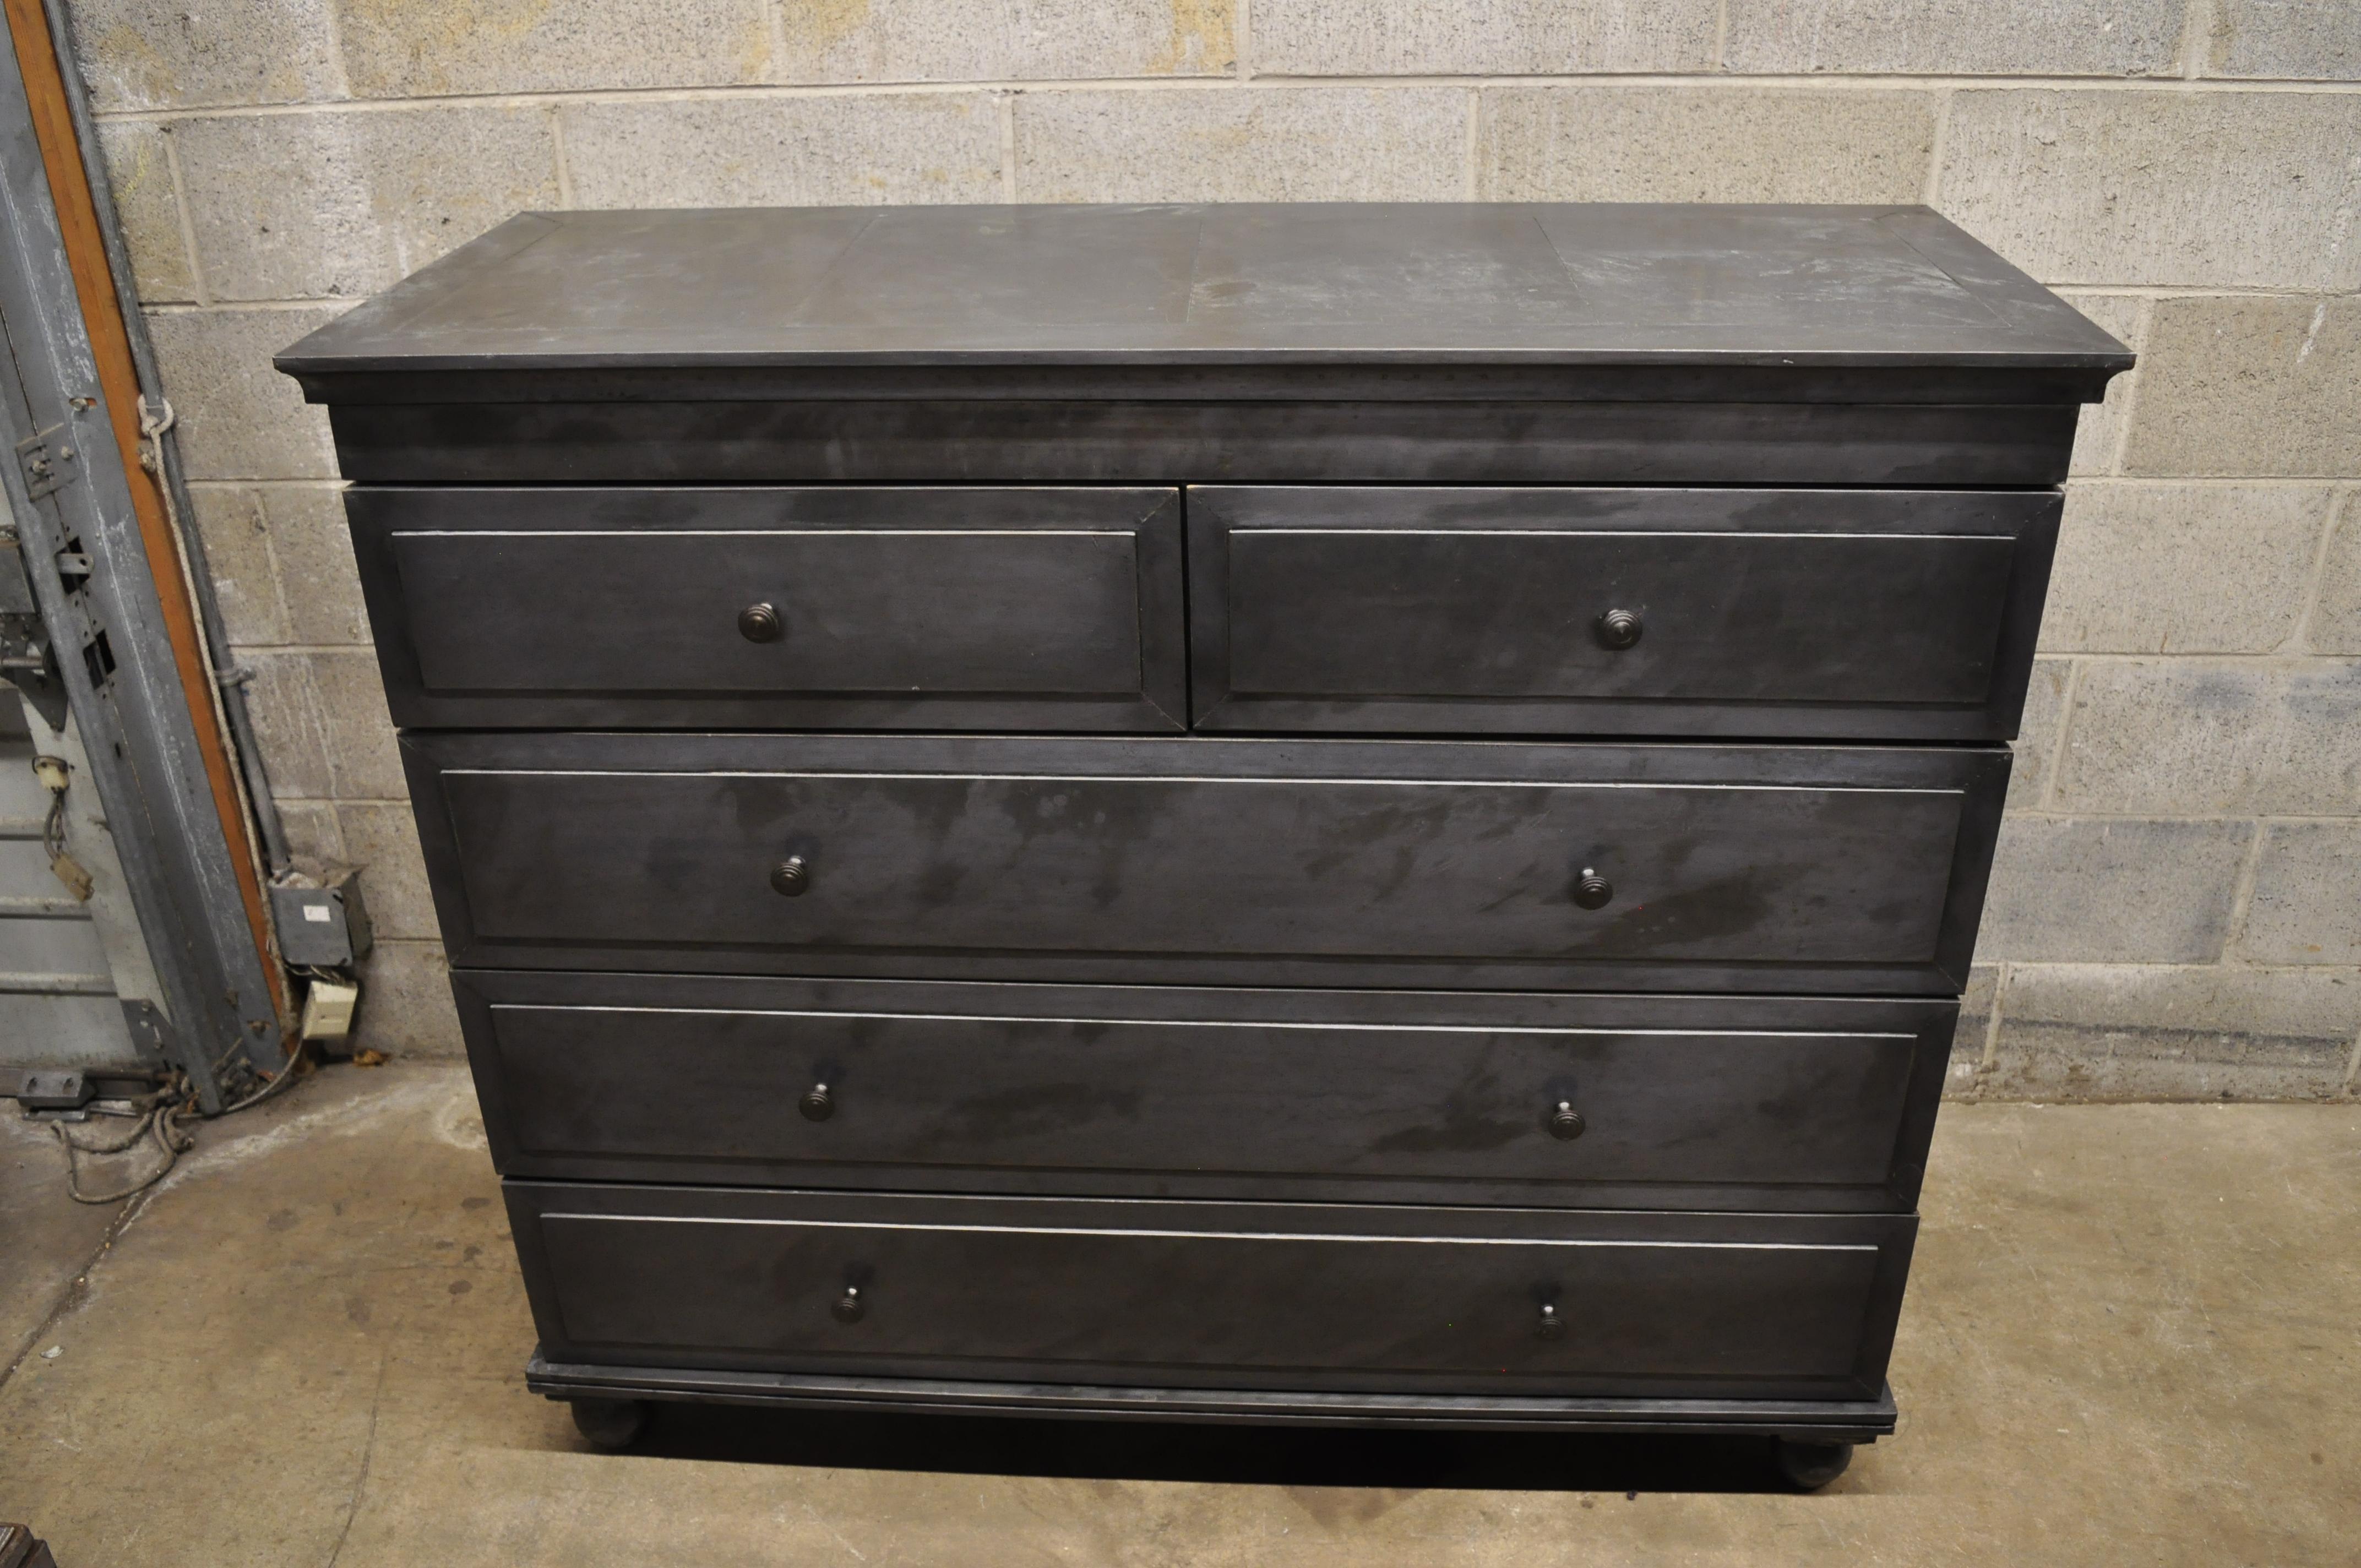 Restoration hardware Annecy metal wrapped 5-drawer chest dresser Zinc (A). Item features hand wrapped sheet metal frame, hand-hammered nails, antiqued and oxidated finish displaying artisans work, zinc finish, 5 drawers. Retail approximately $2600,